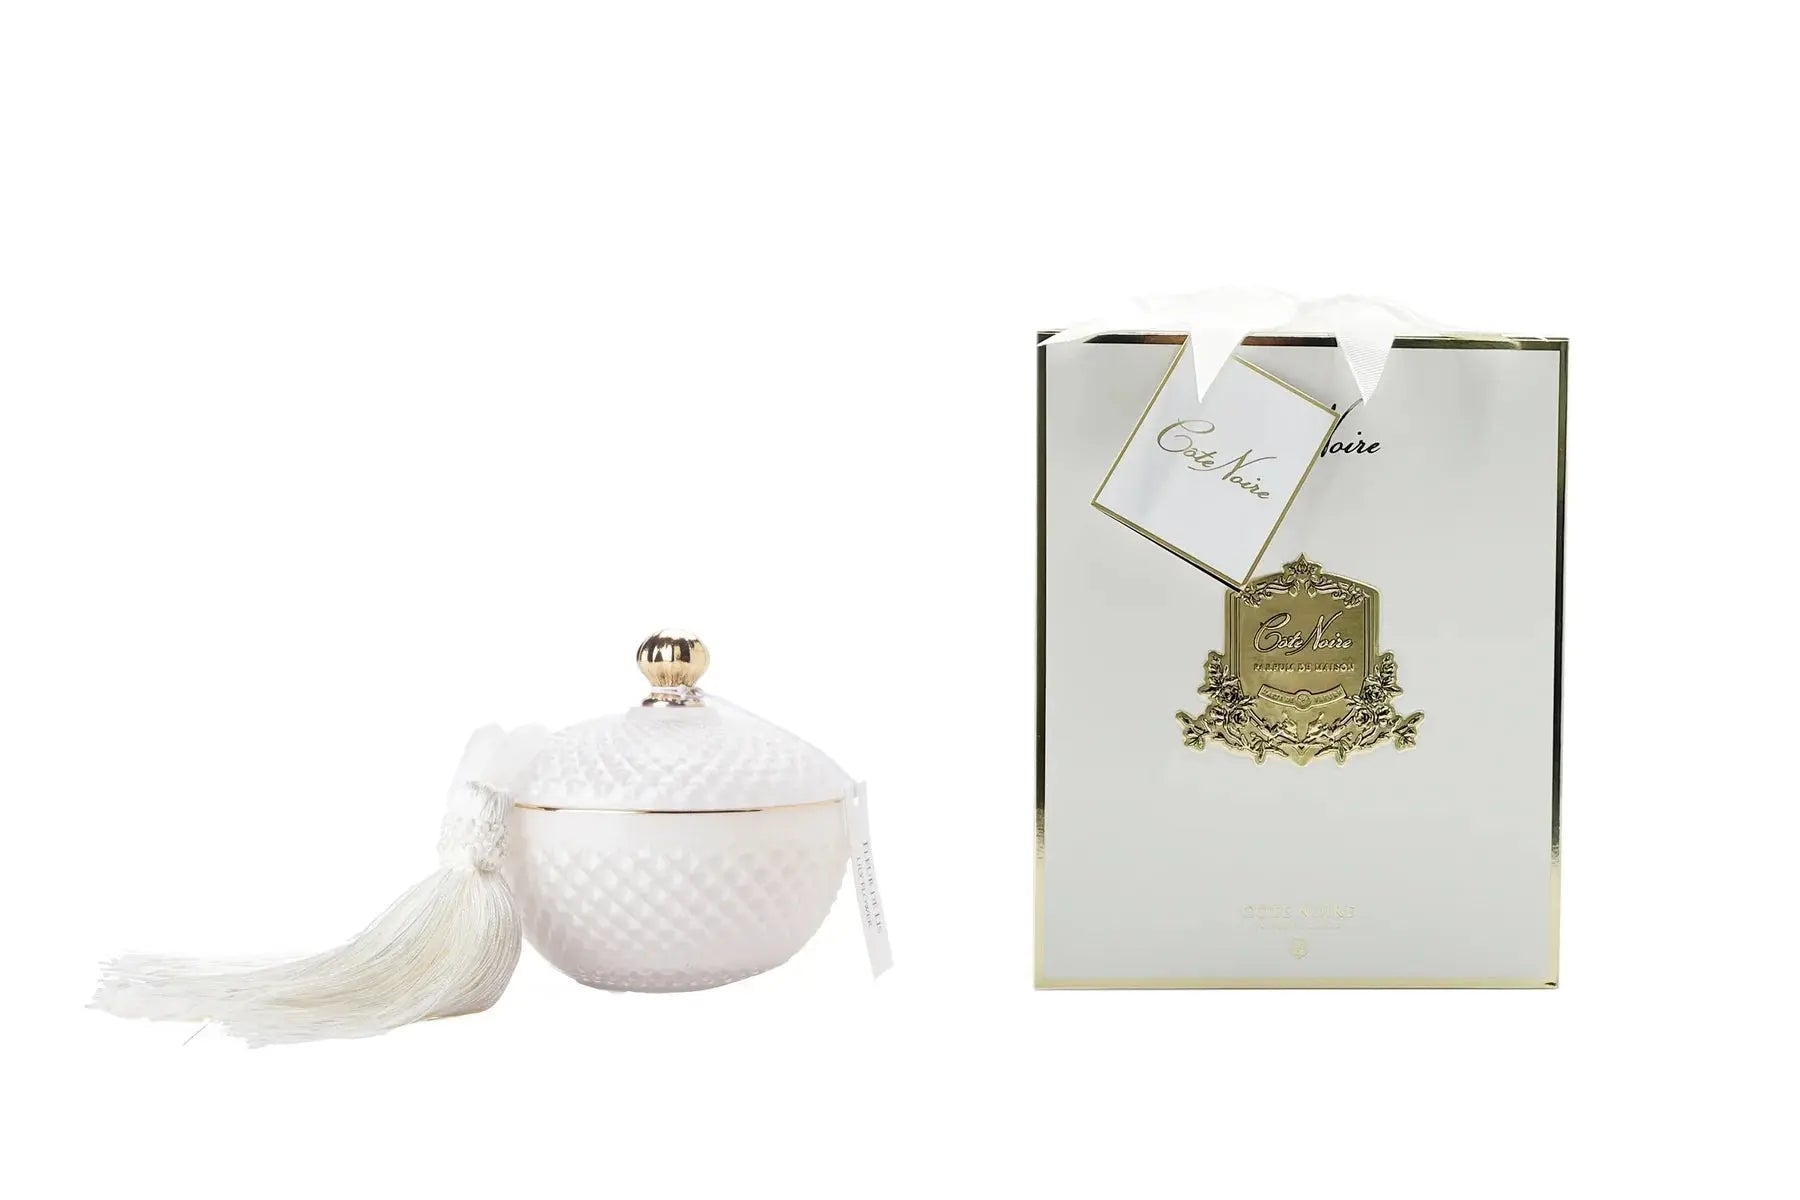 A round, Art Deco-style candle container in a white color with a textured diamond pattern, topped with a gold-colored knob and adorned with a matching white tassel. The container is accompanied by a white and gold rectangular gift box with a label that reads 'Côte Noire' in an elegant script. The box also features a gold emblem and a hanging tag.